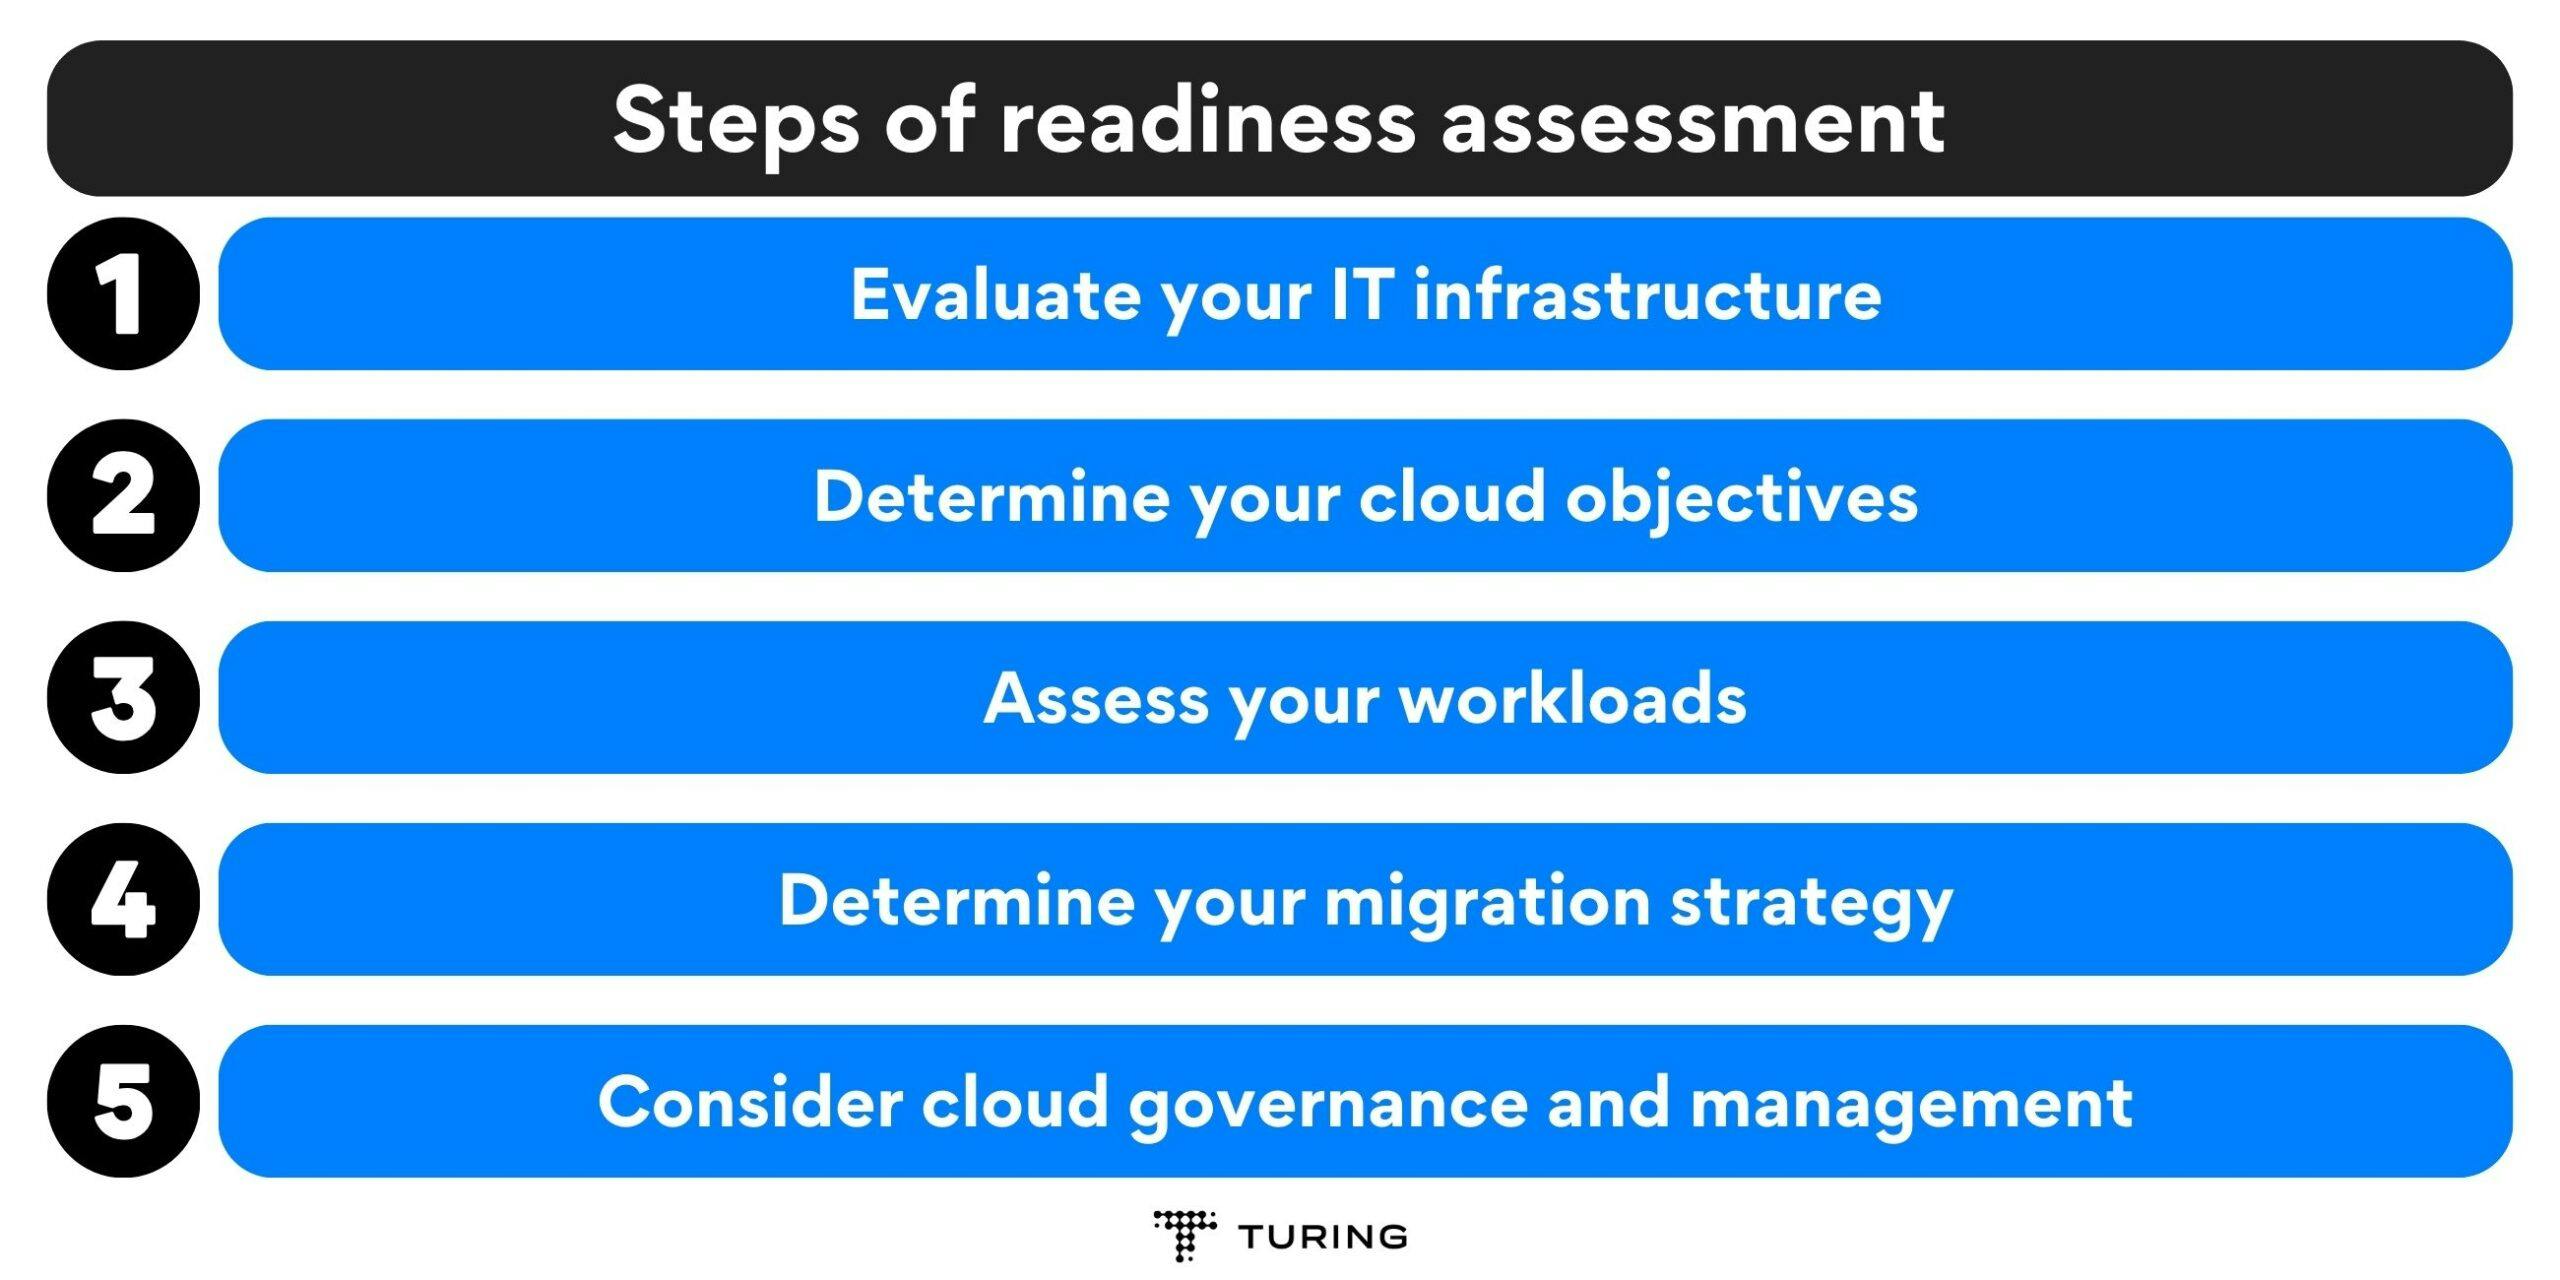 Steps of readiness assessment